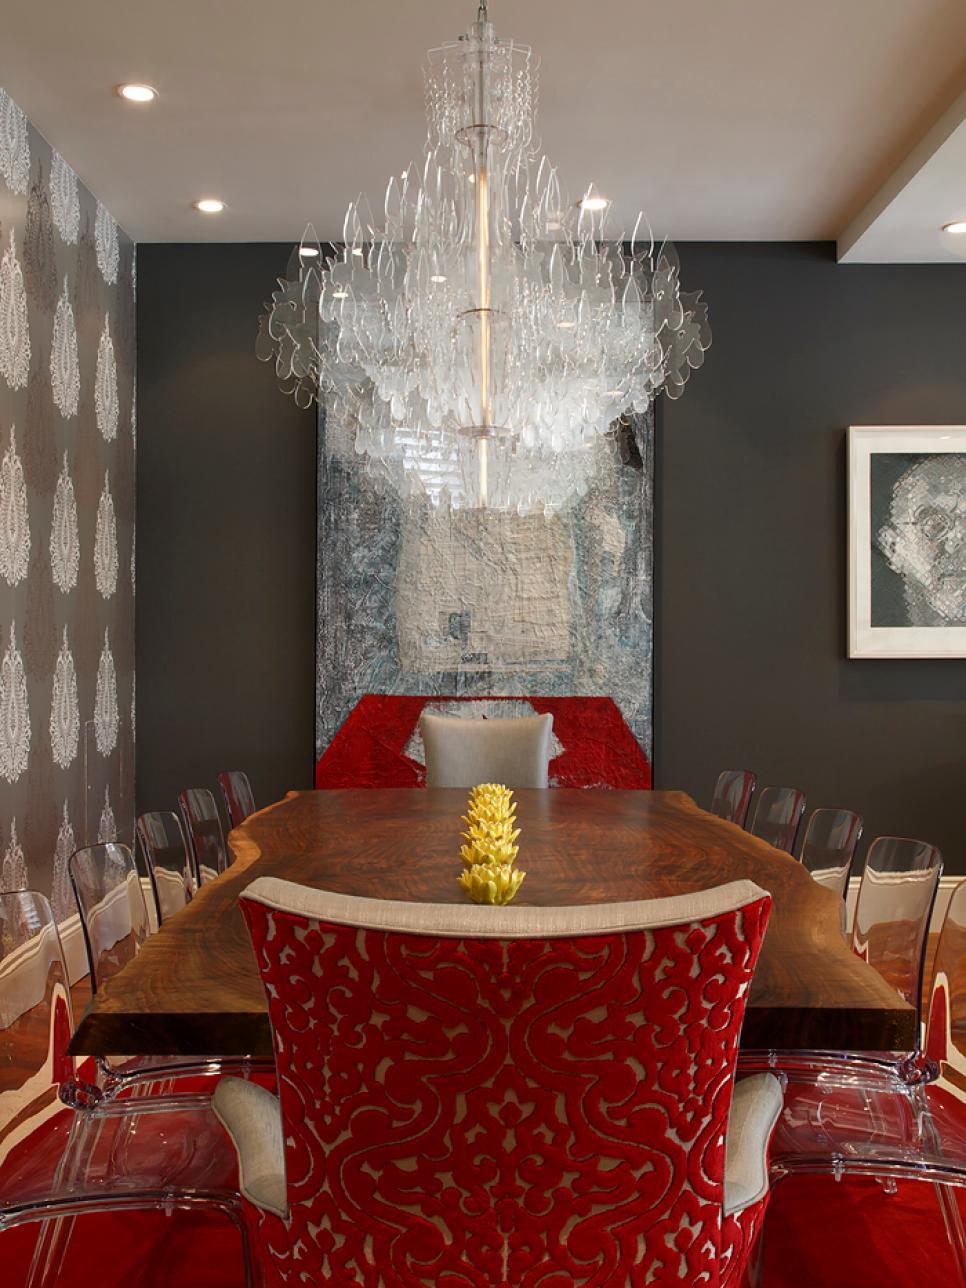 Chandelier in Designed Dining Room by Tineke Triggs 